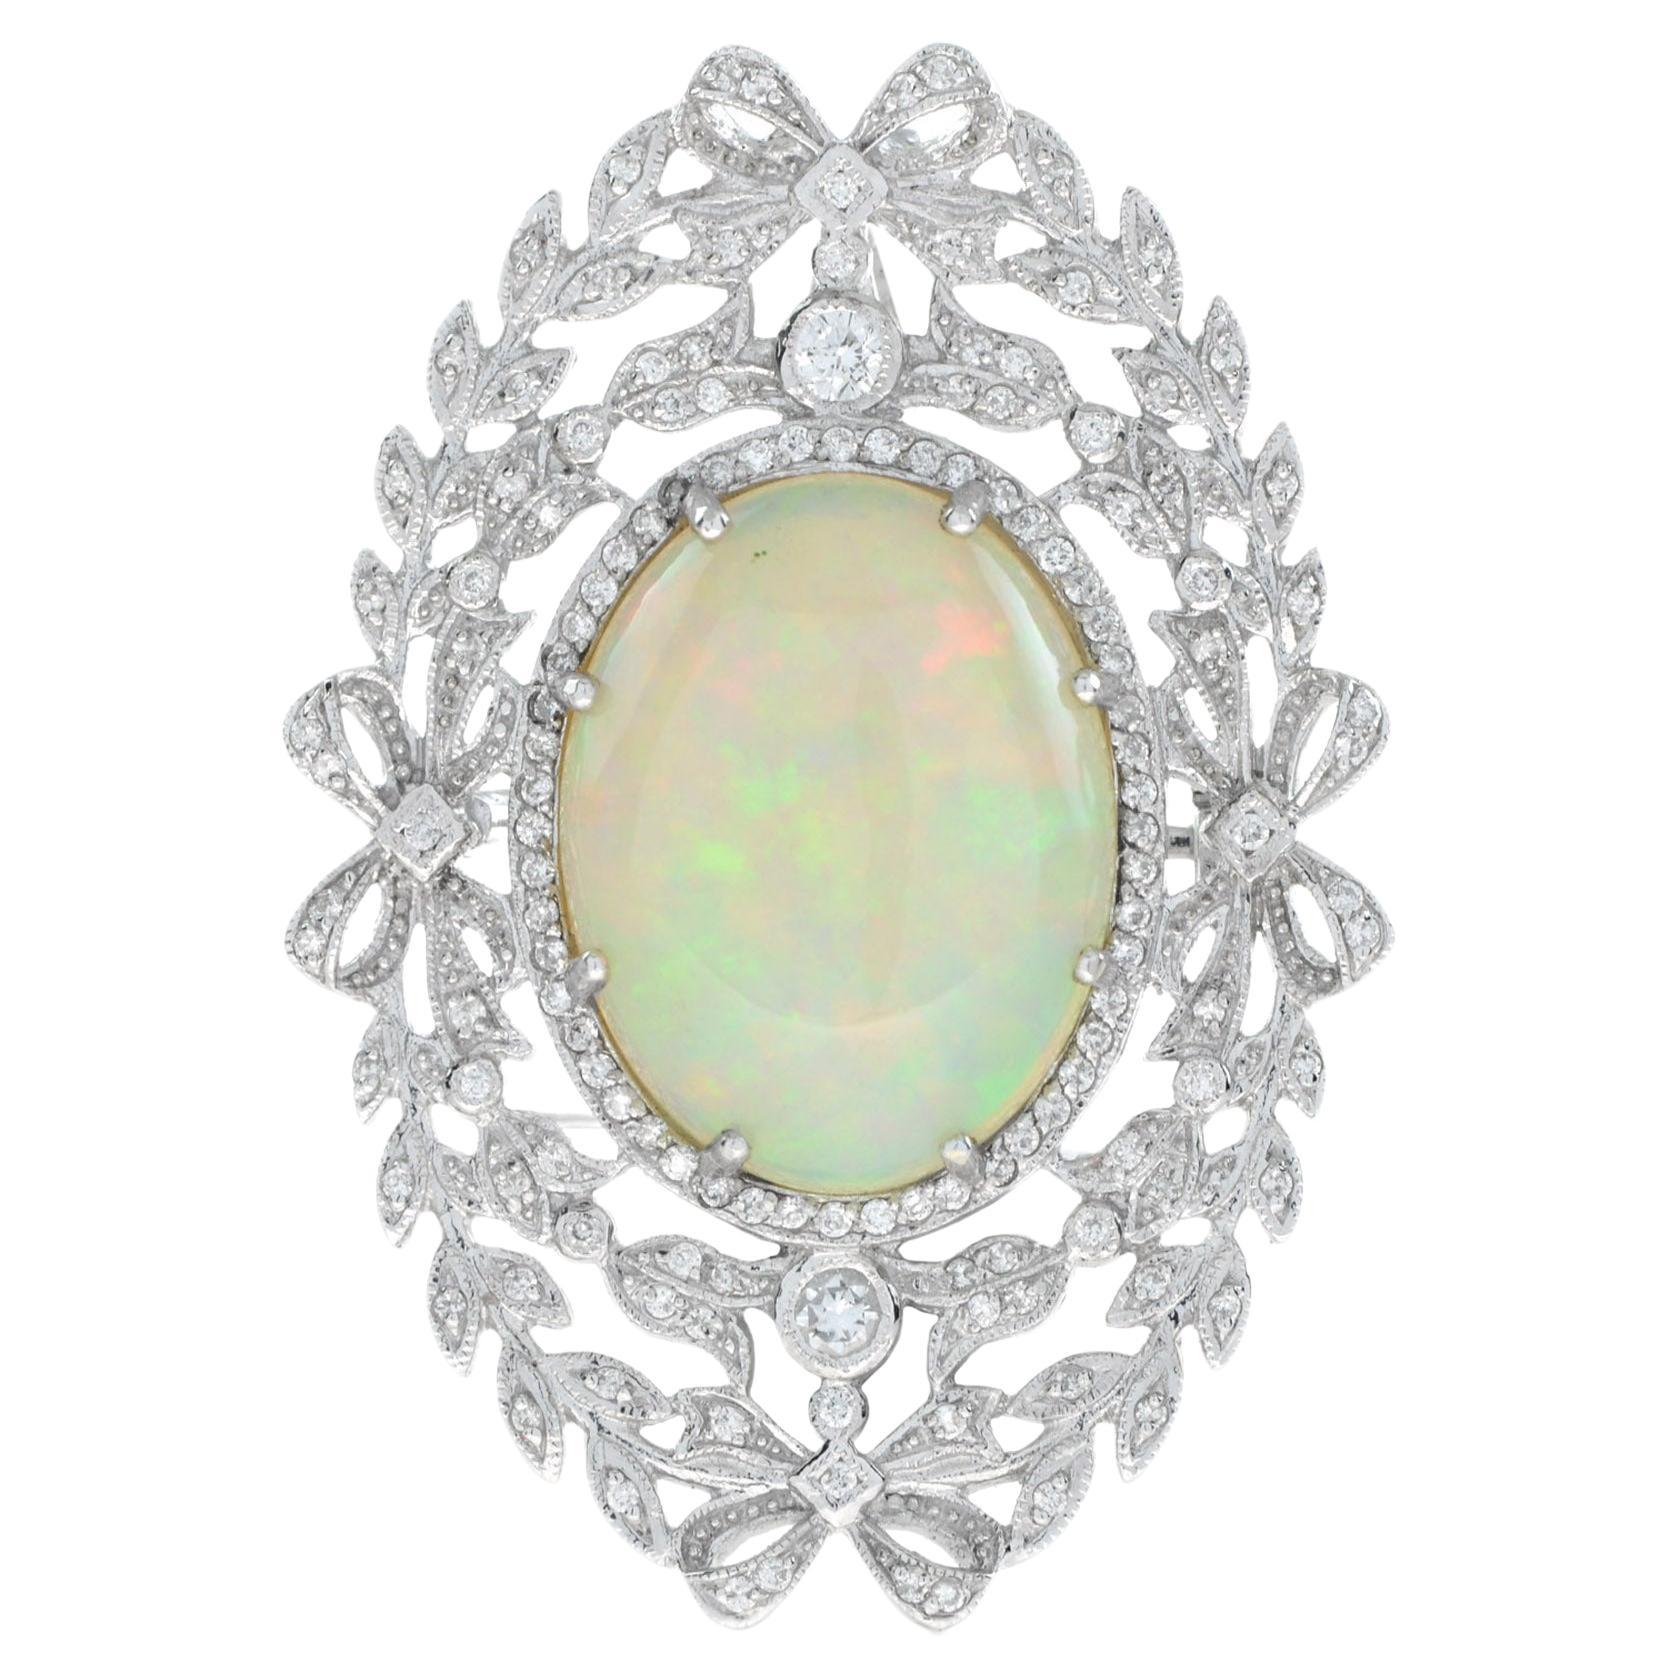 Edwardian Style 13.43 Ct. Ethiopian Opal and Diamond Brooch in 18K White Gold